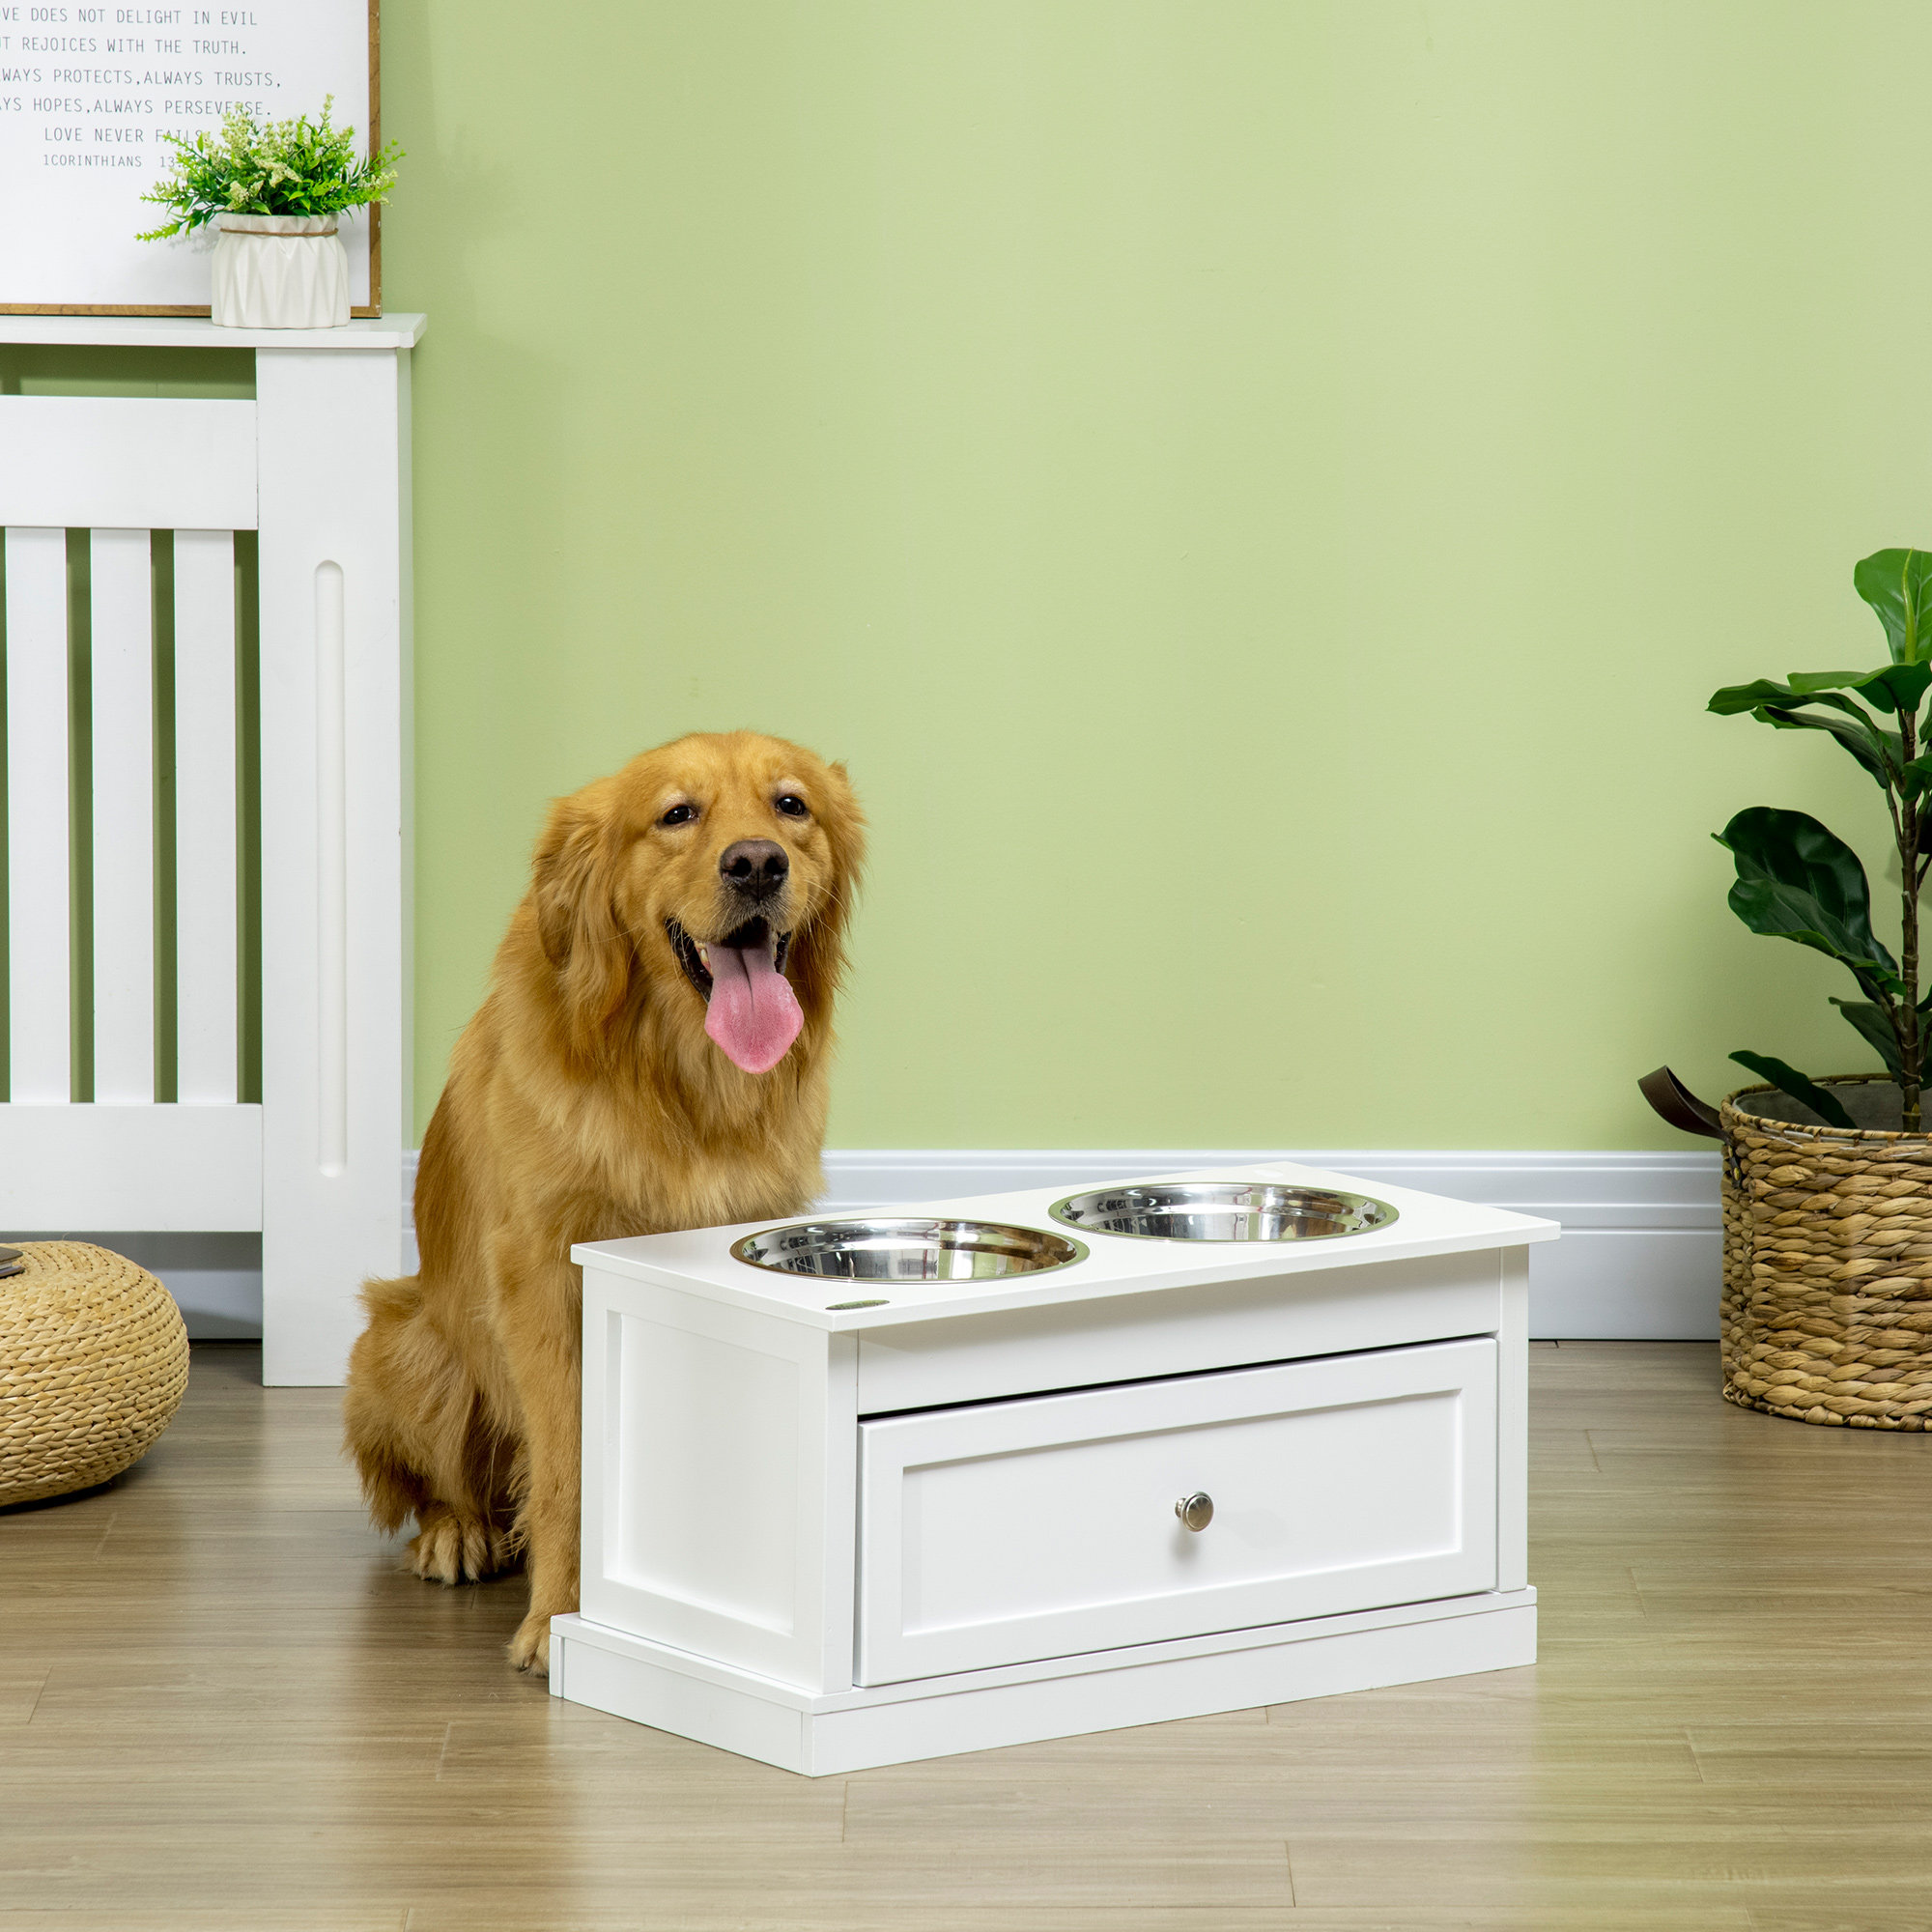 Pet Feeder Station Roomfitters Color: White